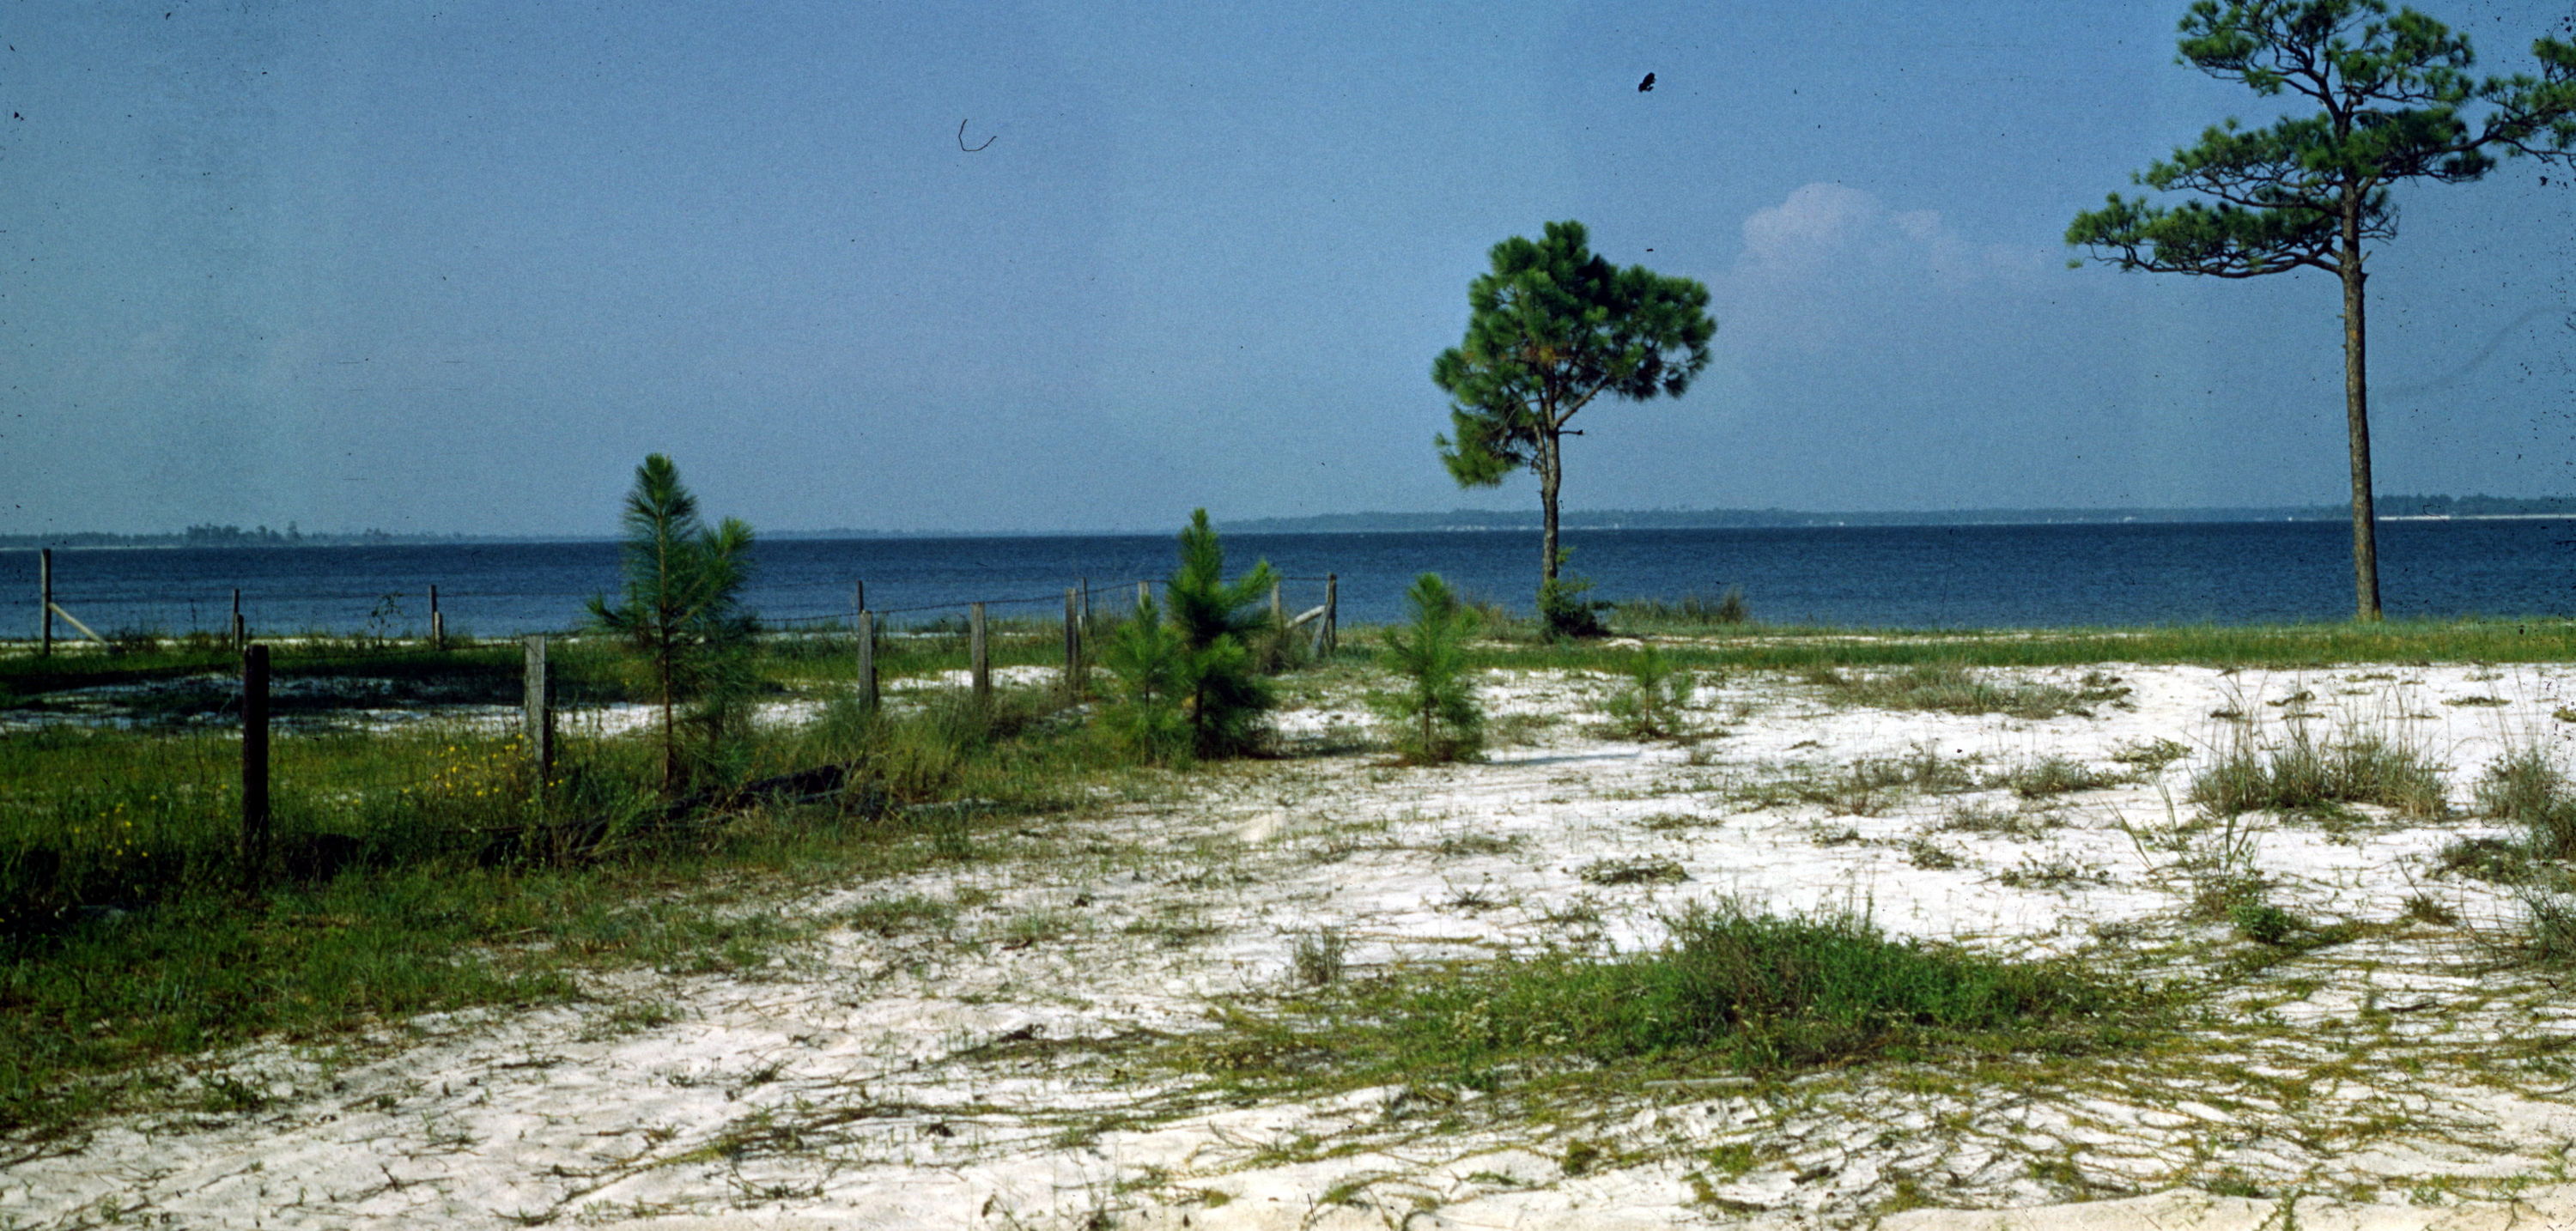 Perdido Bay from Soldier Creek looking South